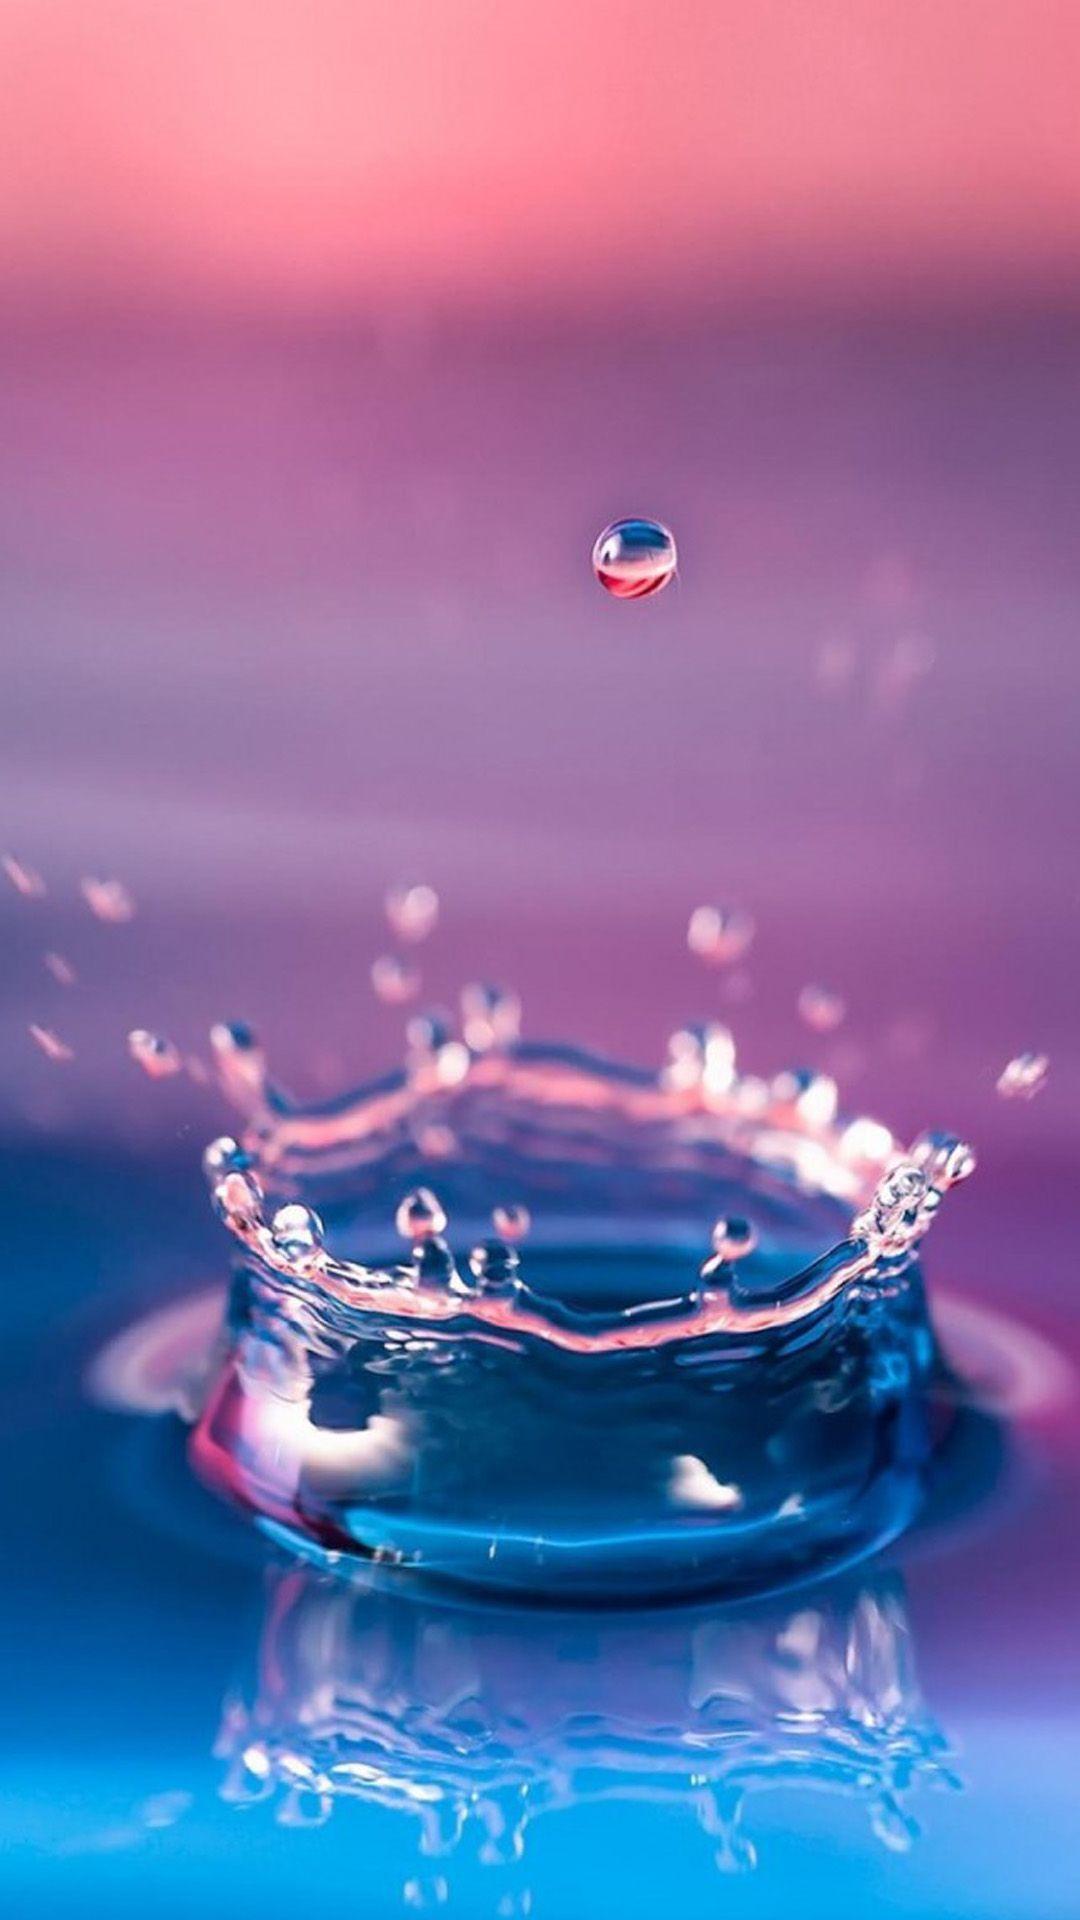 Free Download Samsung Galaxy S5 Wallpaper with Water Drop